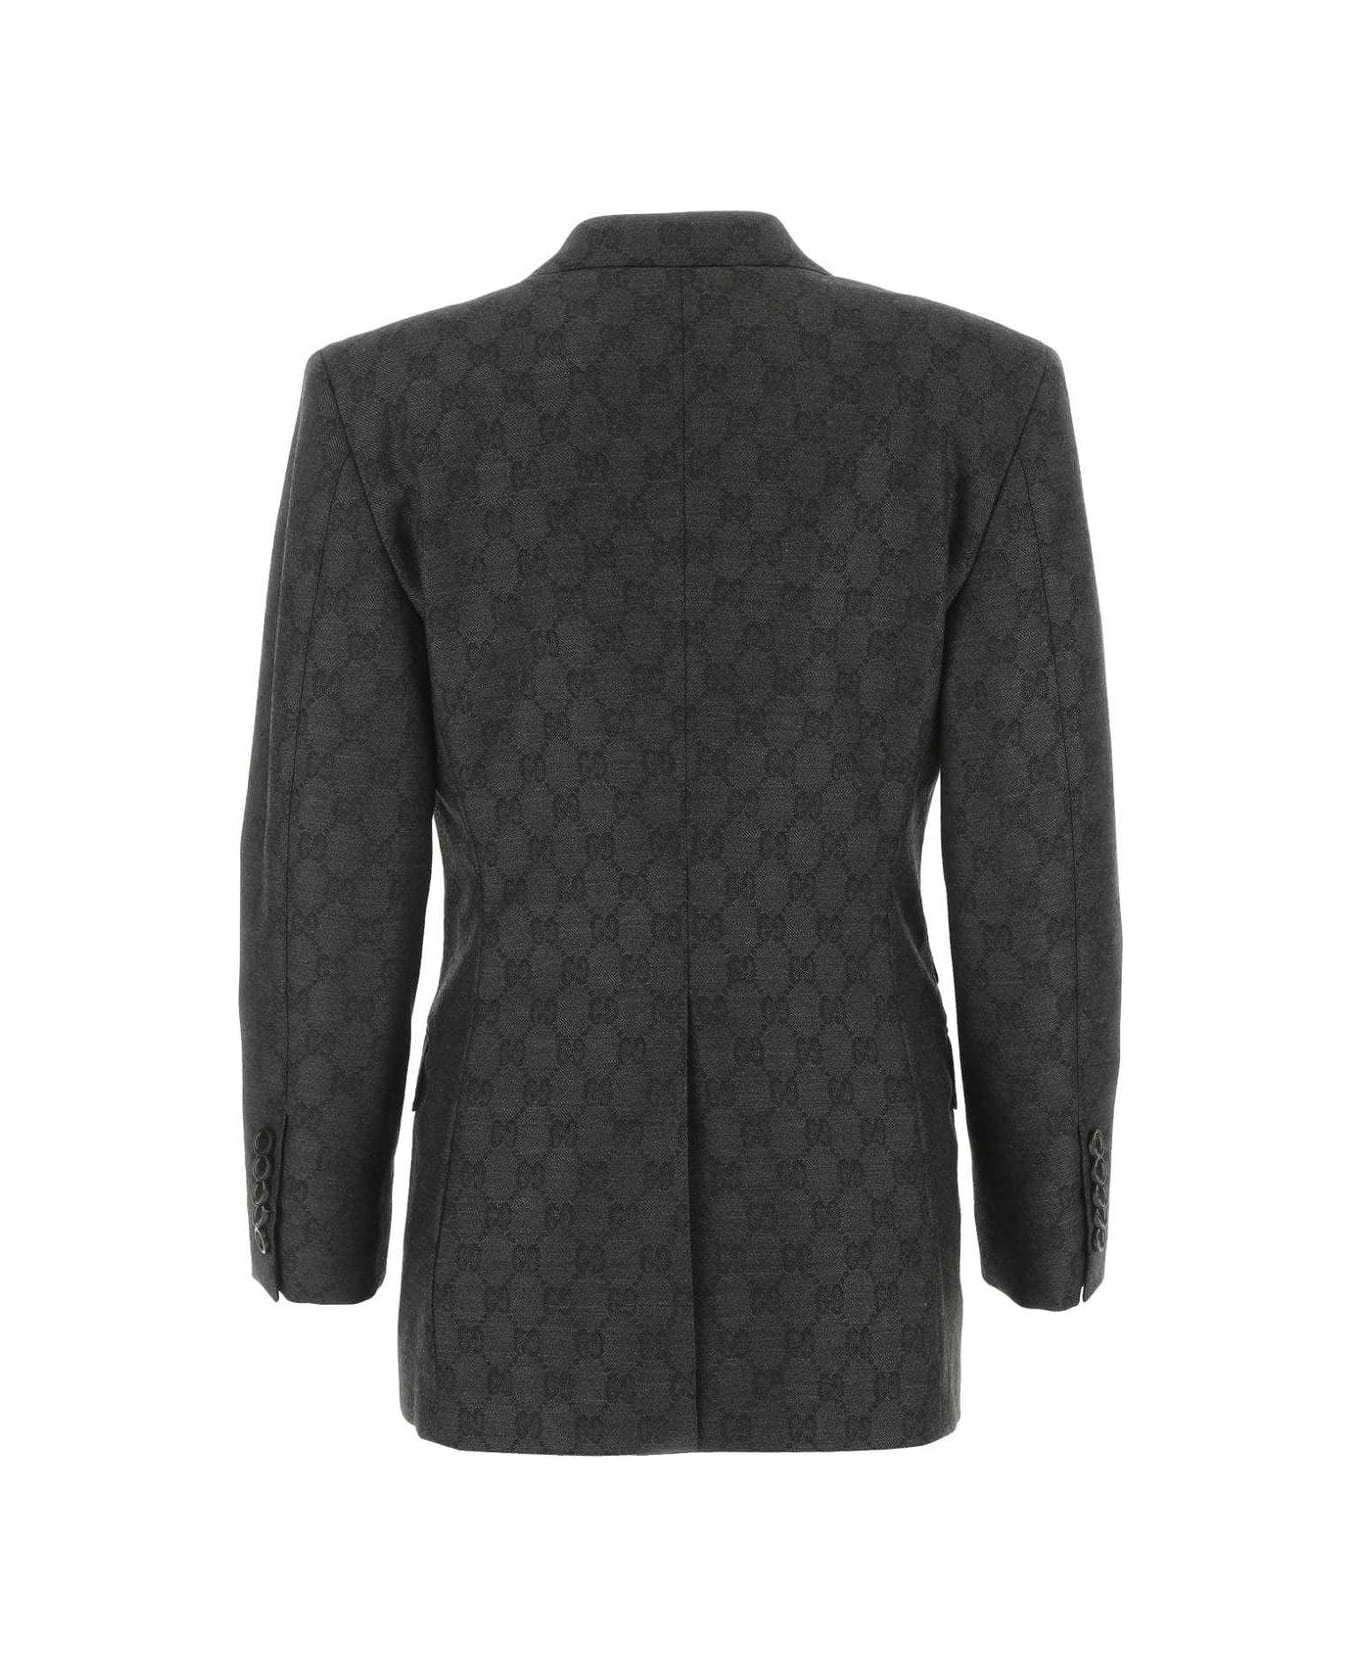 Gucci Gg Jacquard Double-breasted Jacket - Grey